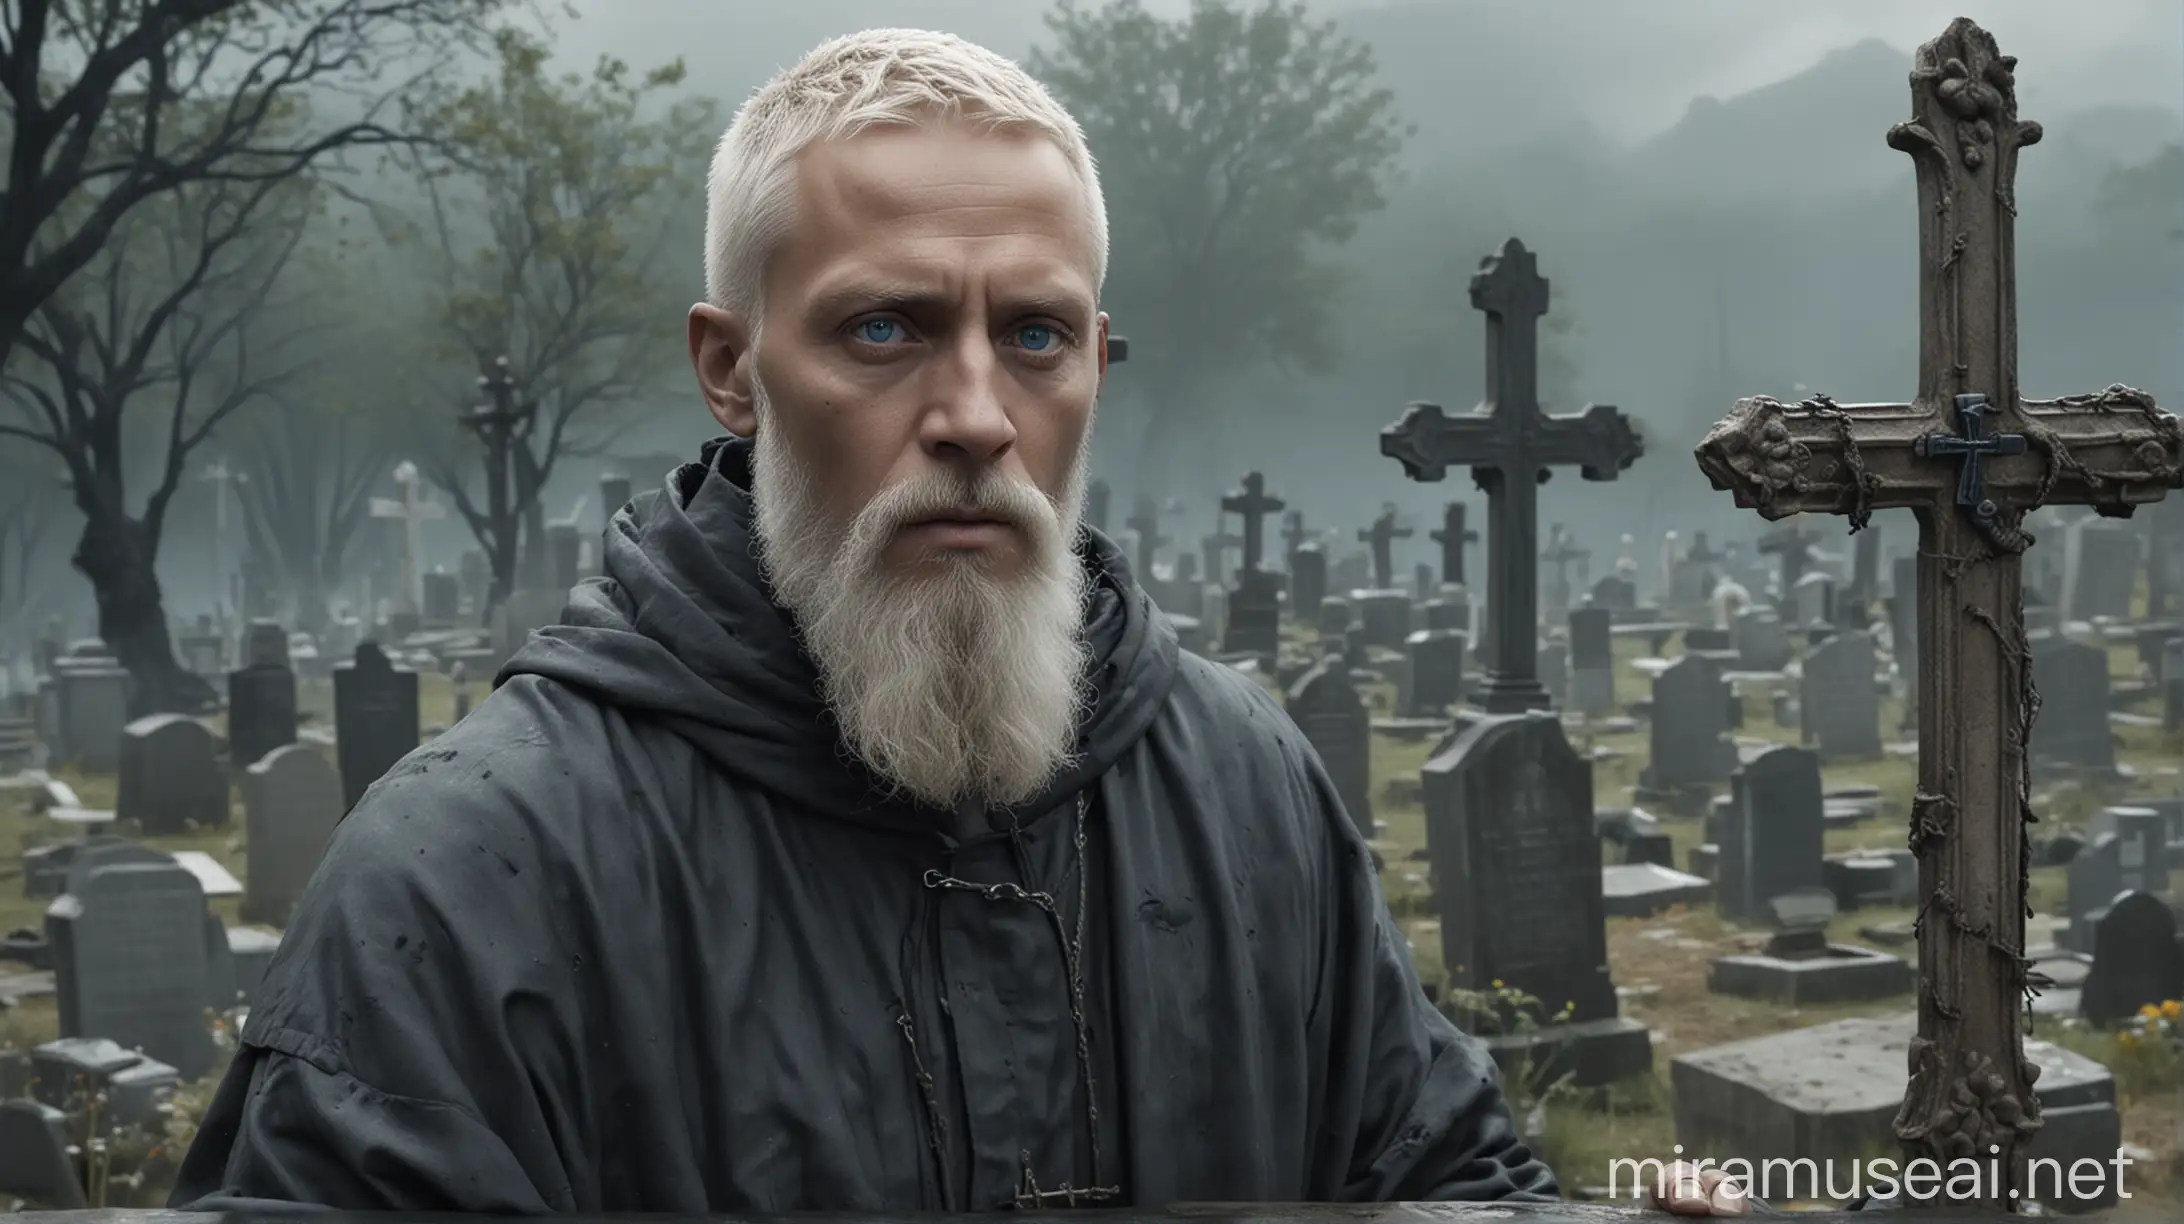 Dominican Monk Visiting Grave in Apocalyptic Cemetery